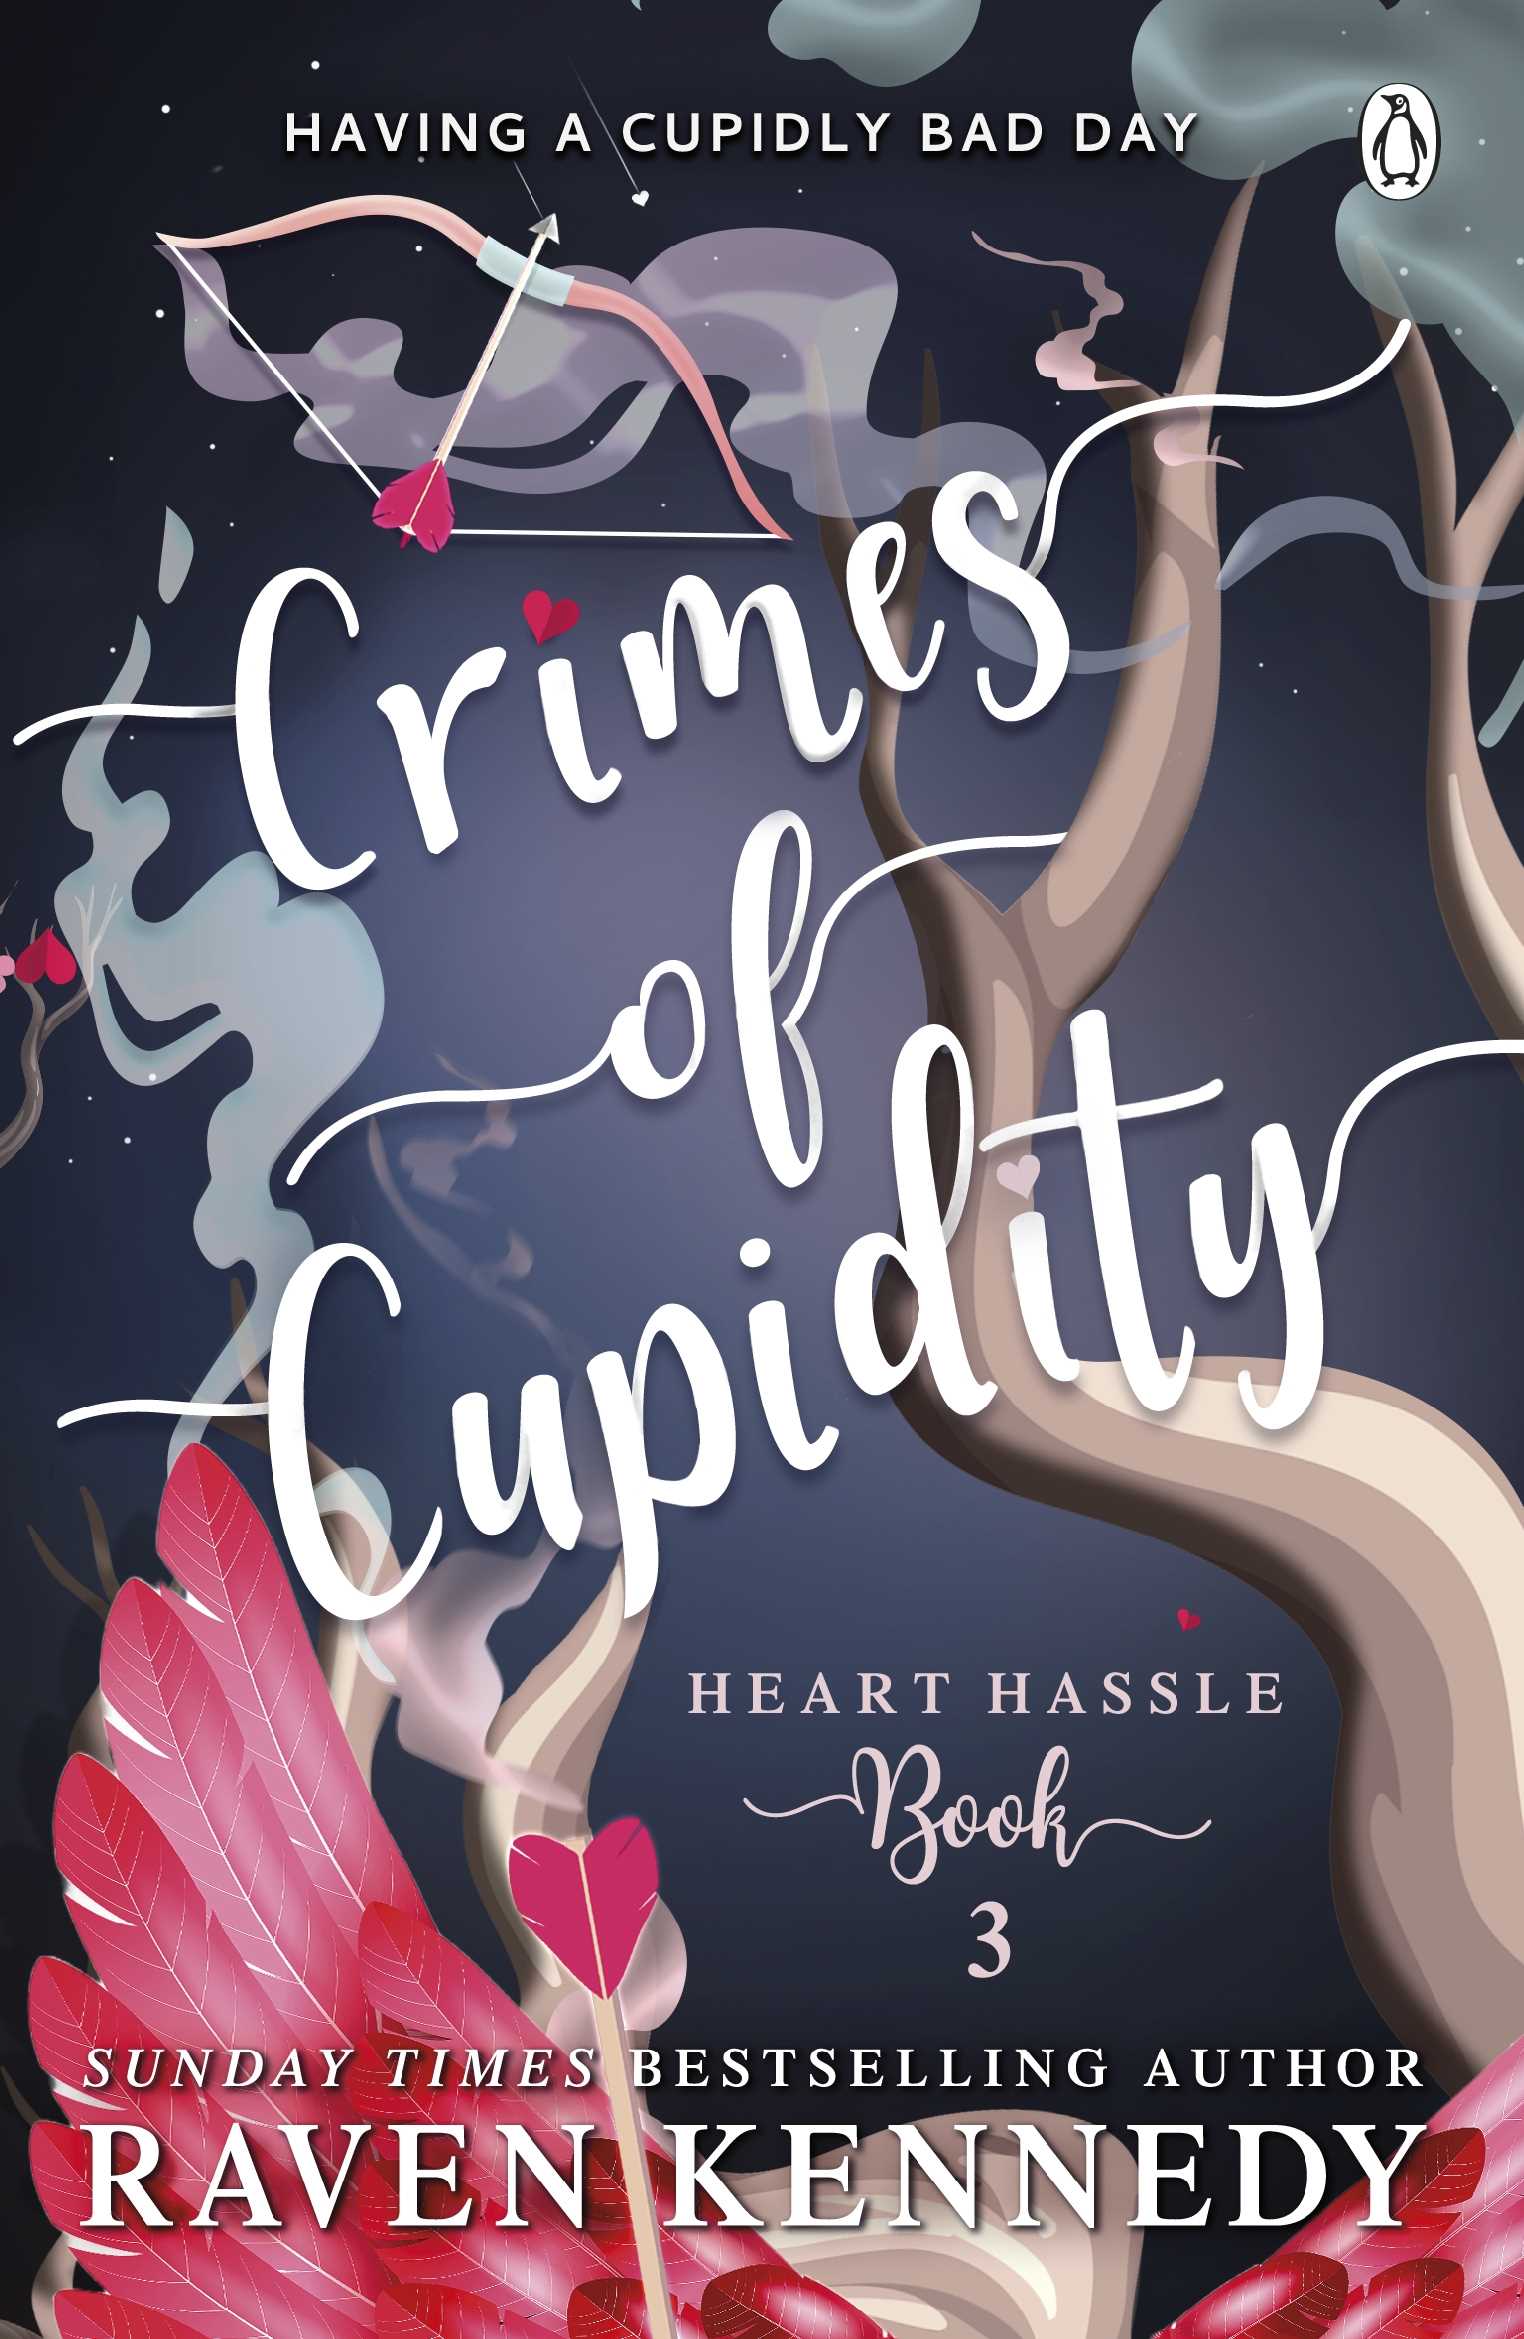 Heart Hassle #03: Crimes of Cupidity